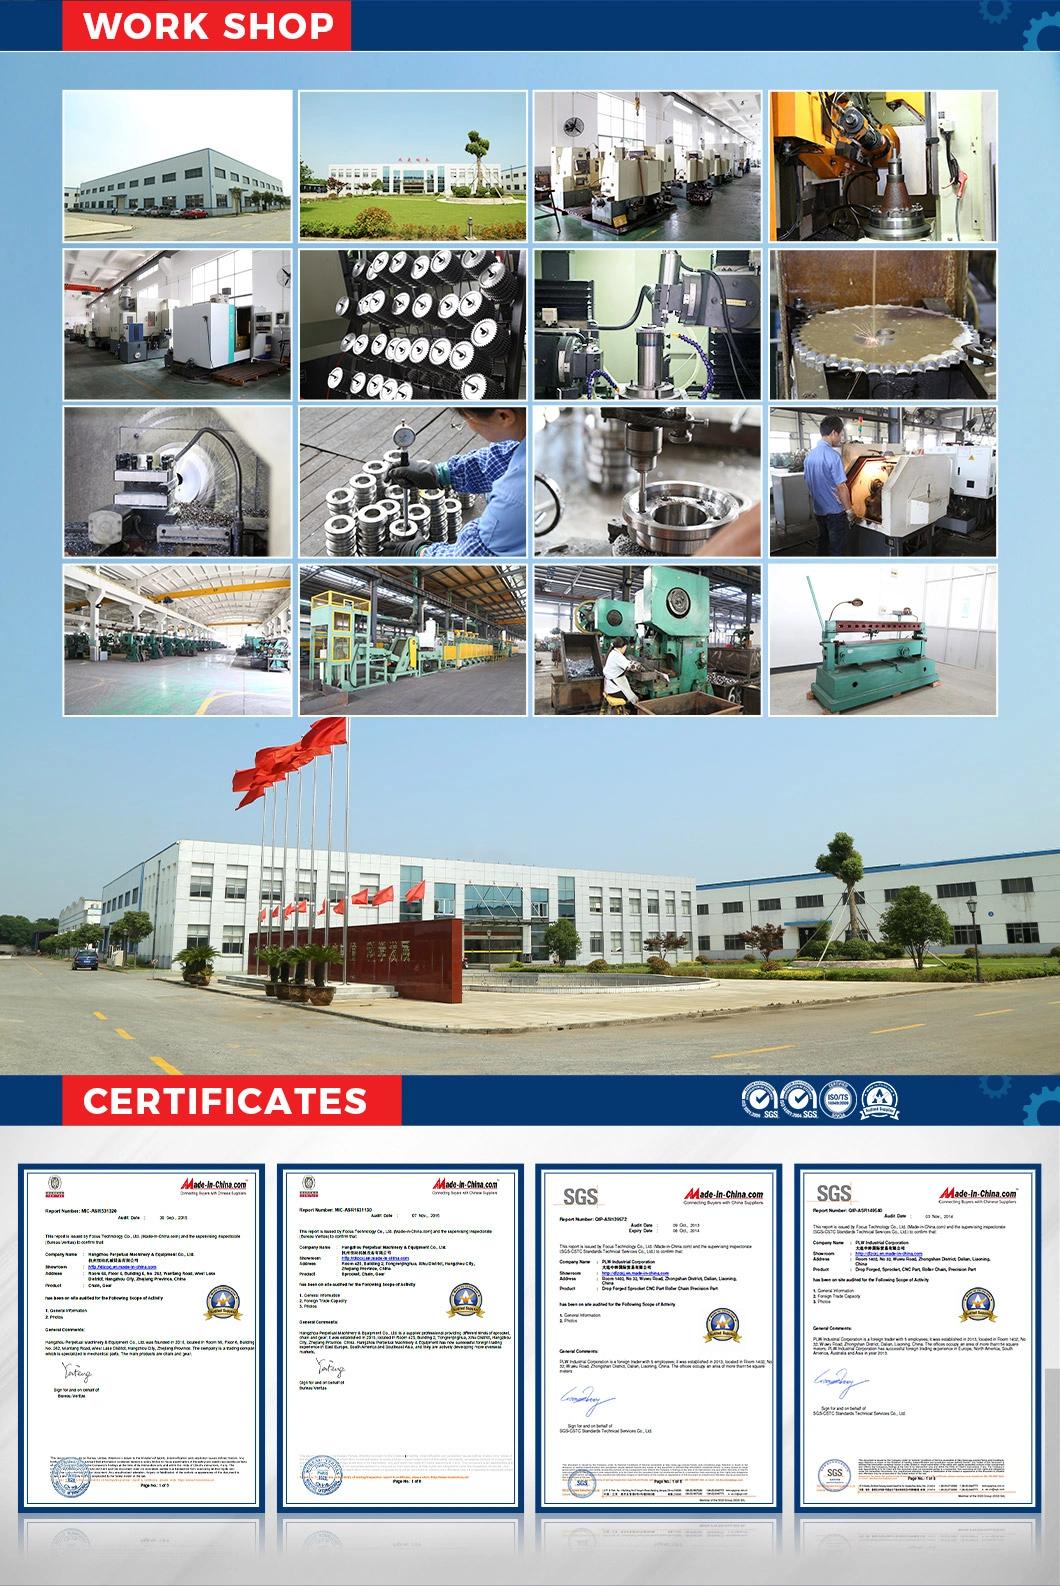 Well Performance Professional Custom Made Industrial Transmission Conveyor Roller Chain